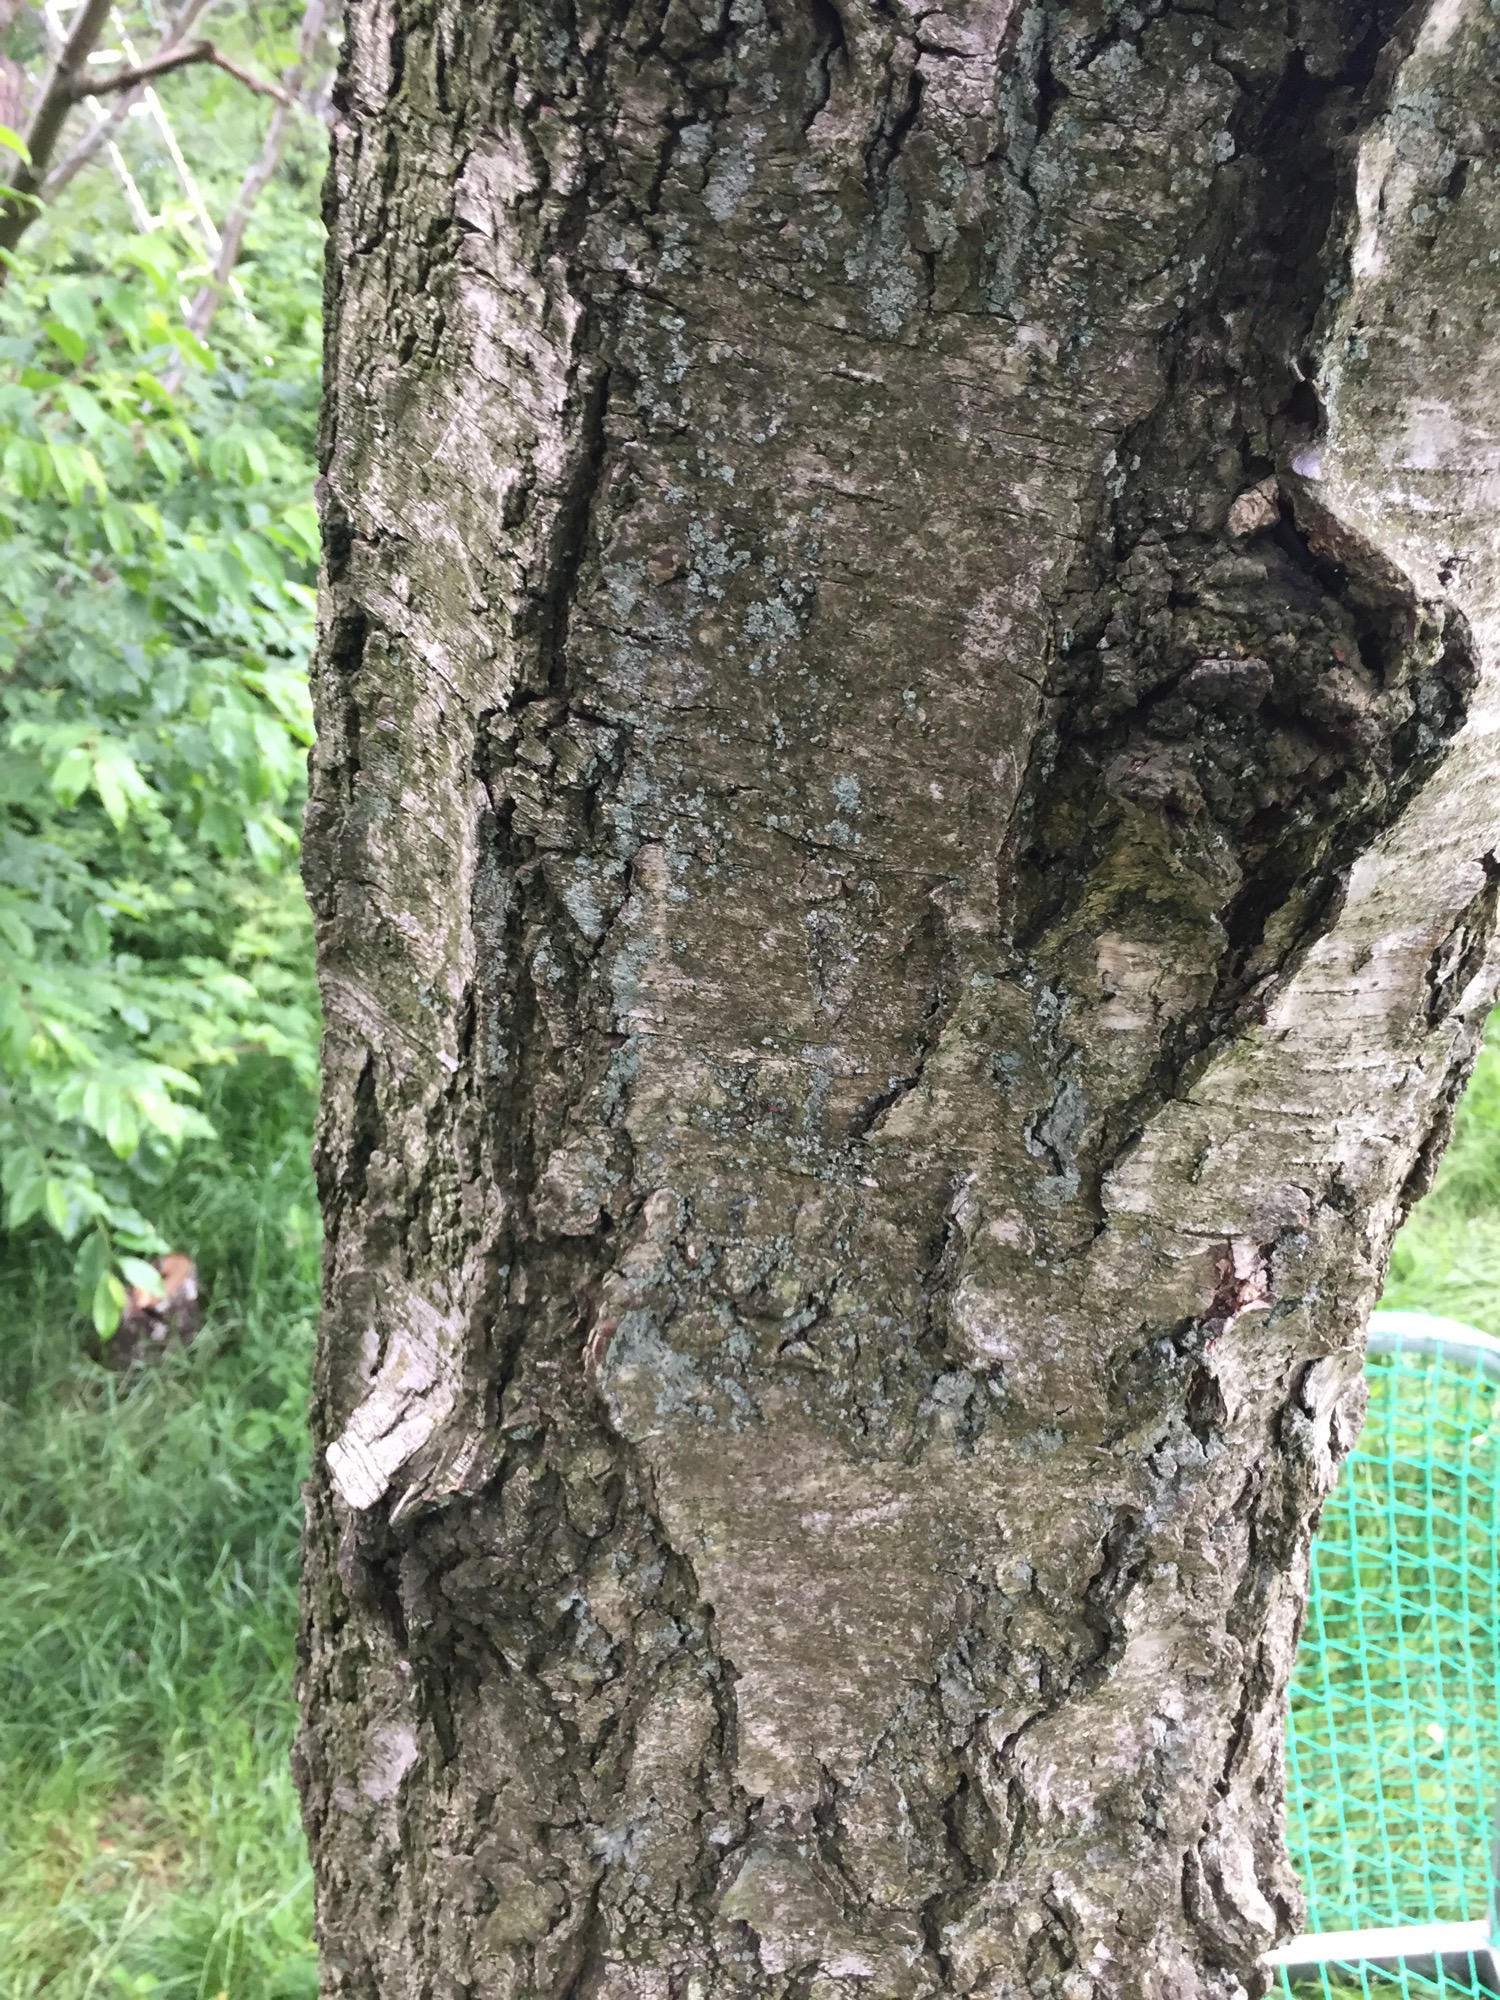 Results of 3 days continuous TreePRO usage on a very rough bark